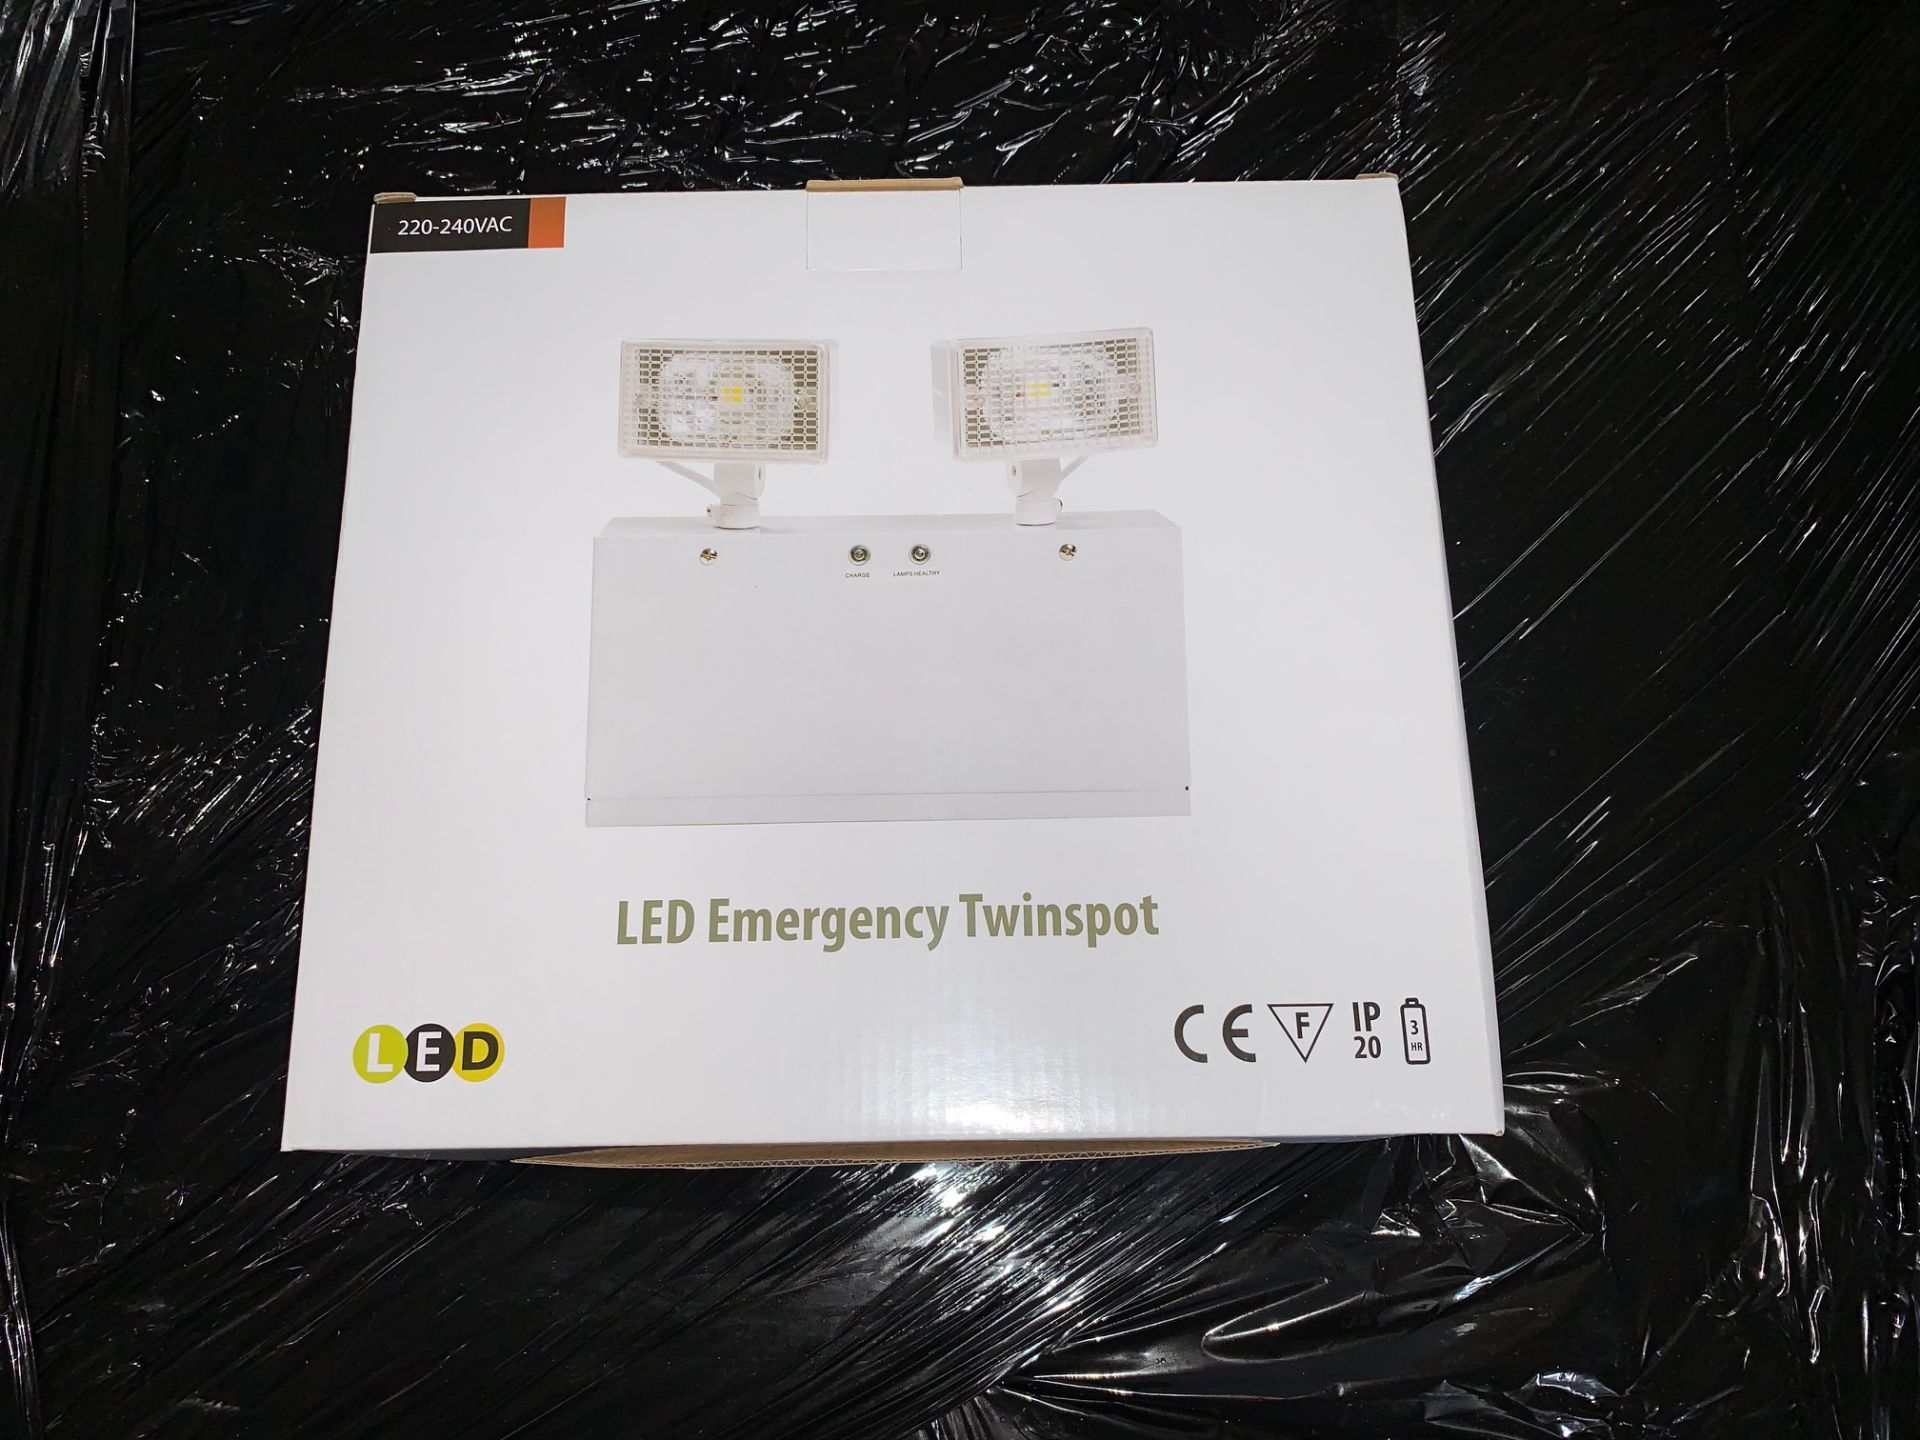 Channel LED Emergency Twinspot 220-240VAC - Product Code GR/NM3/LED/2 - Image 2 of 3